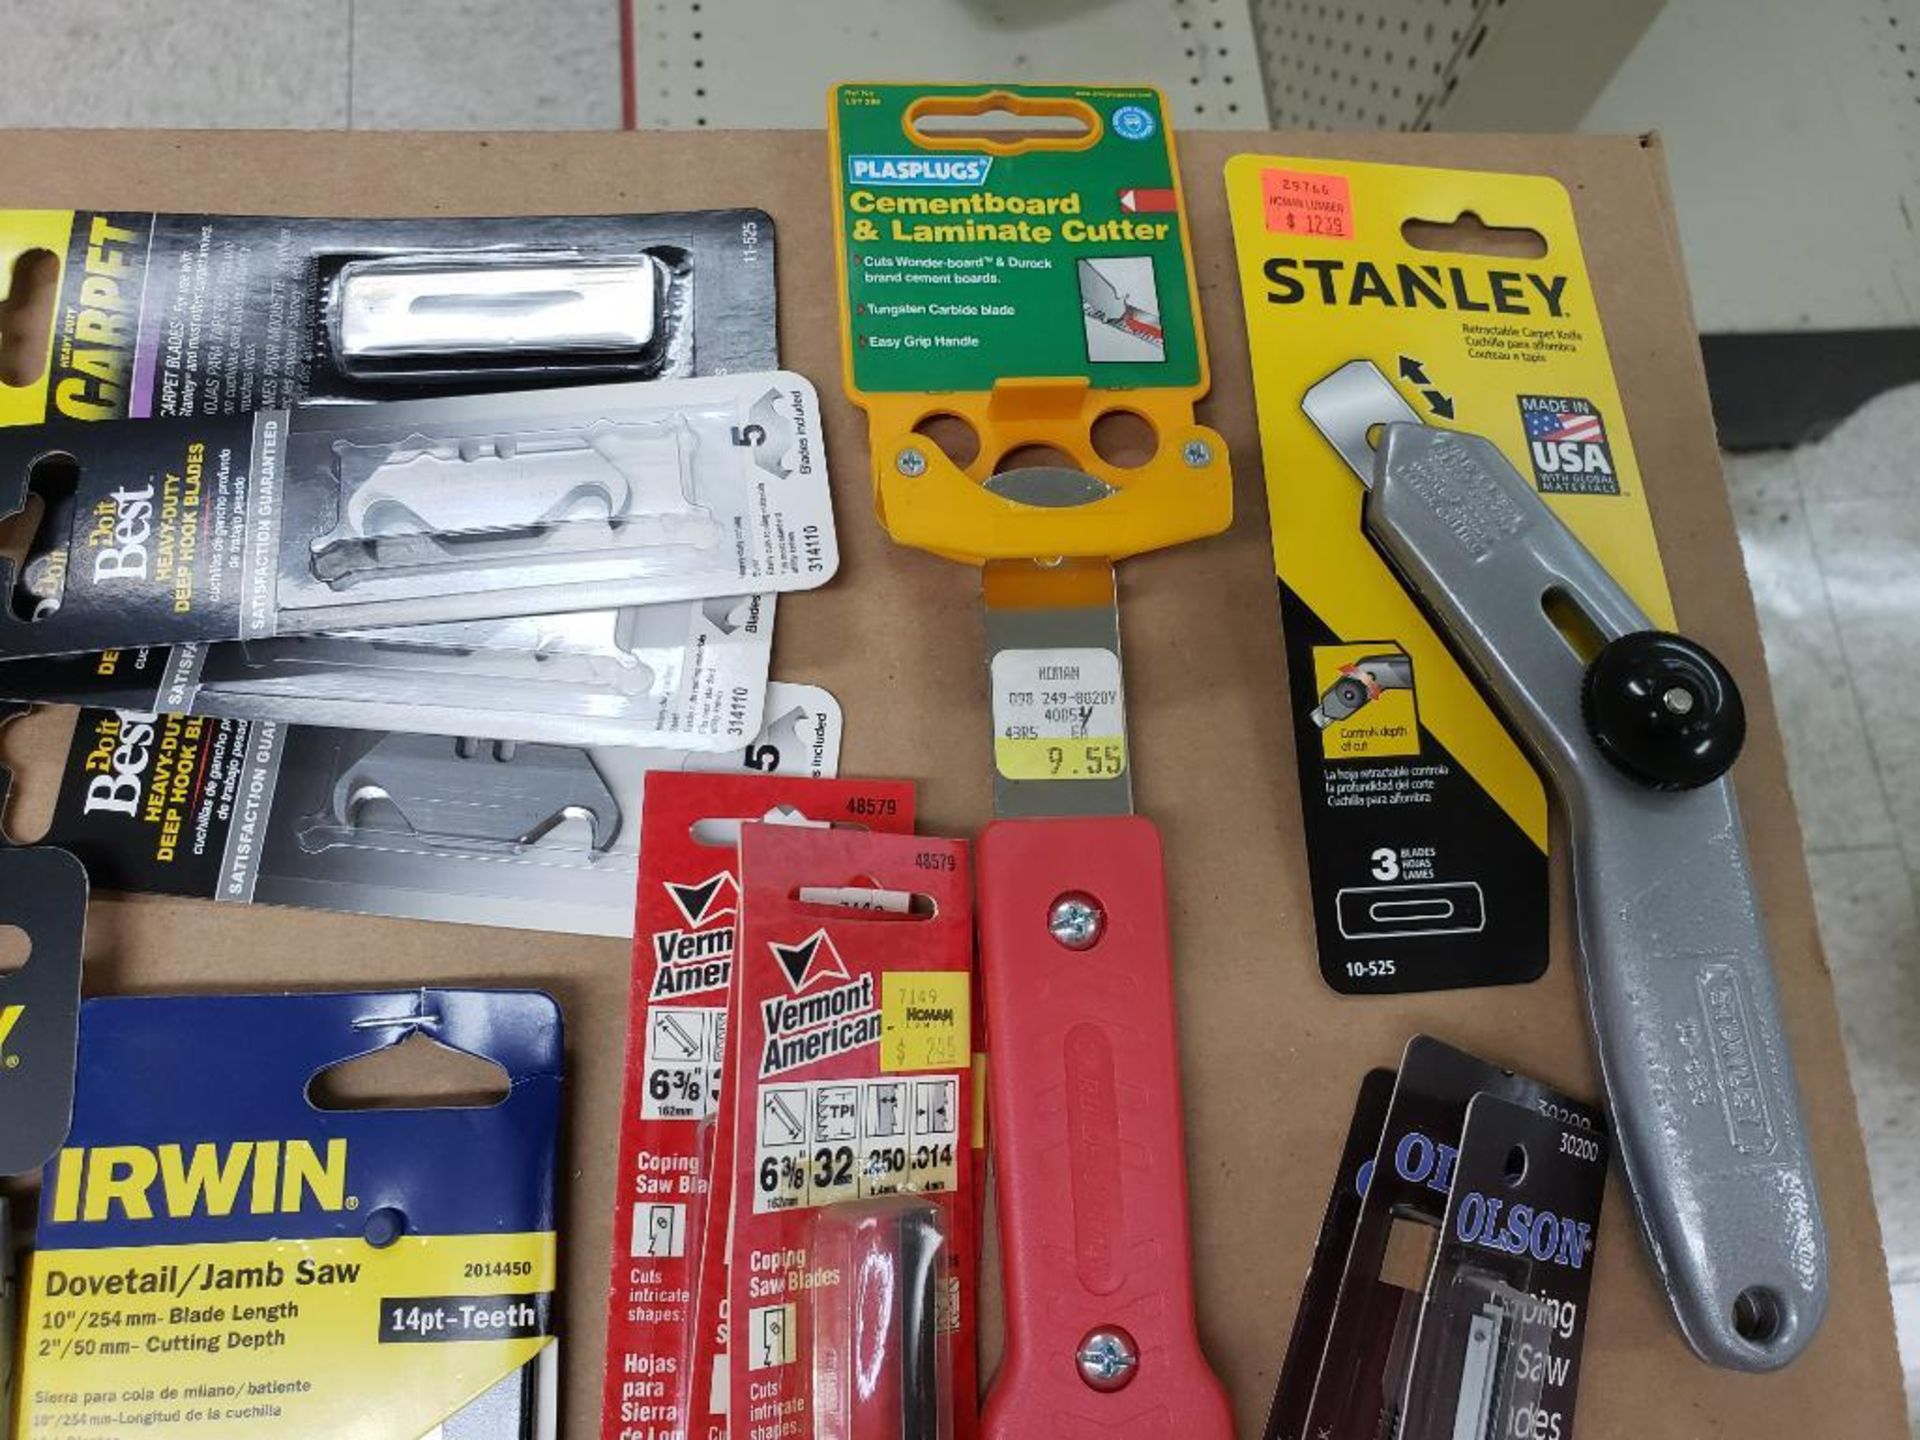 Large assortment of tools. New as pictured. - Image 6 of 12